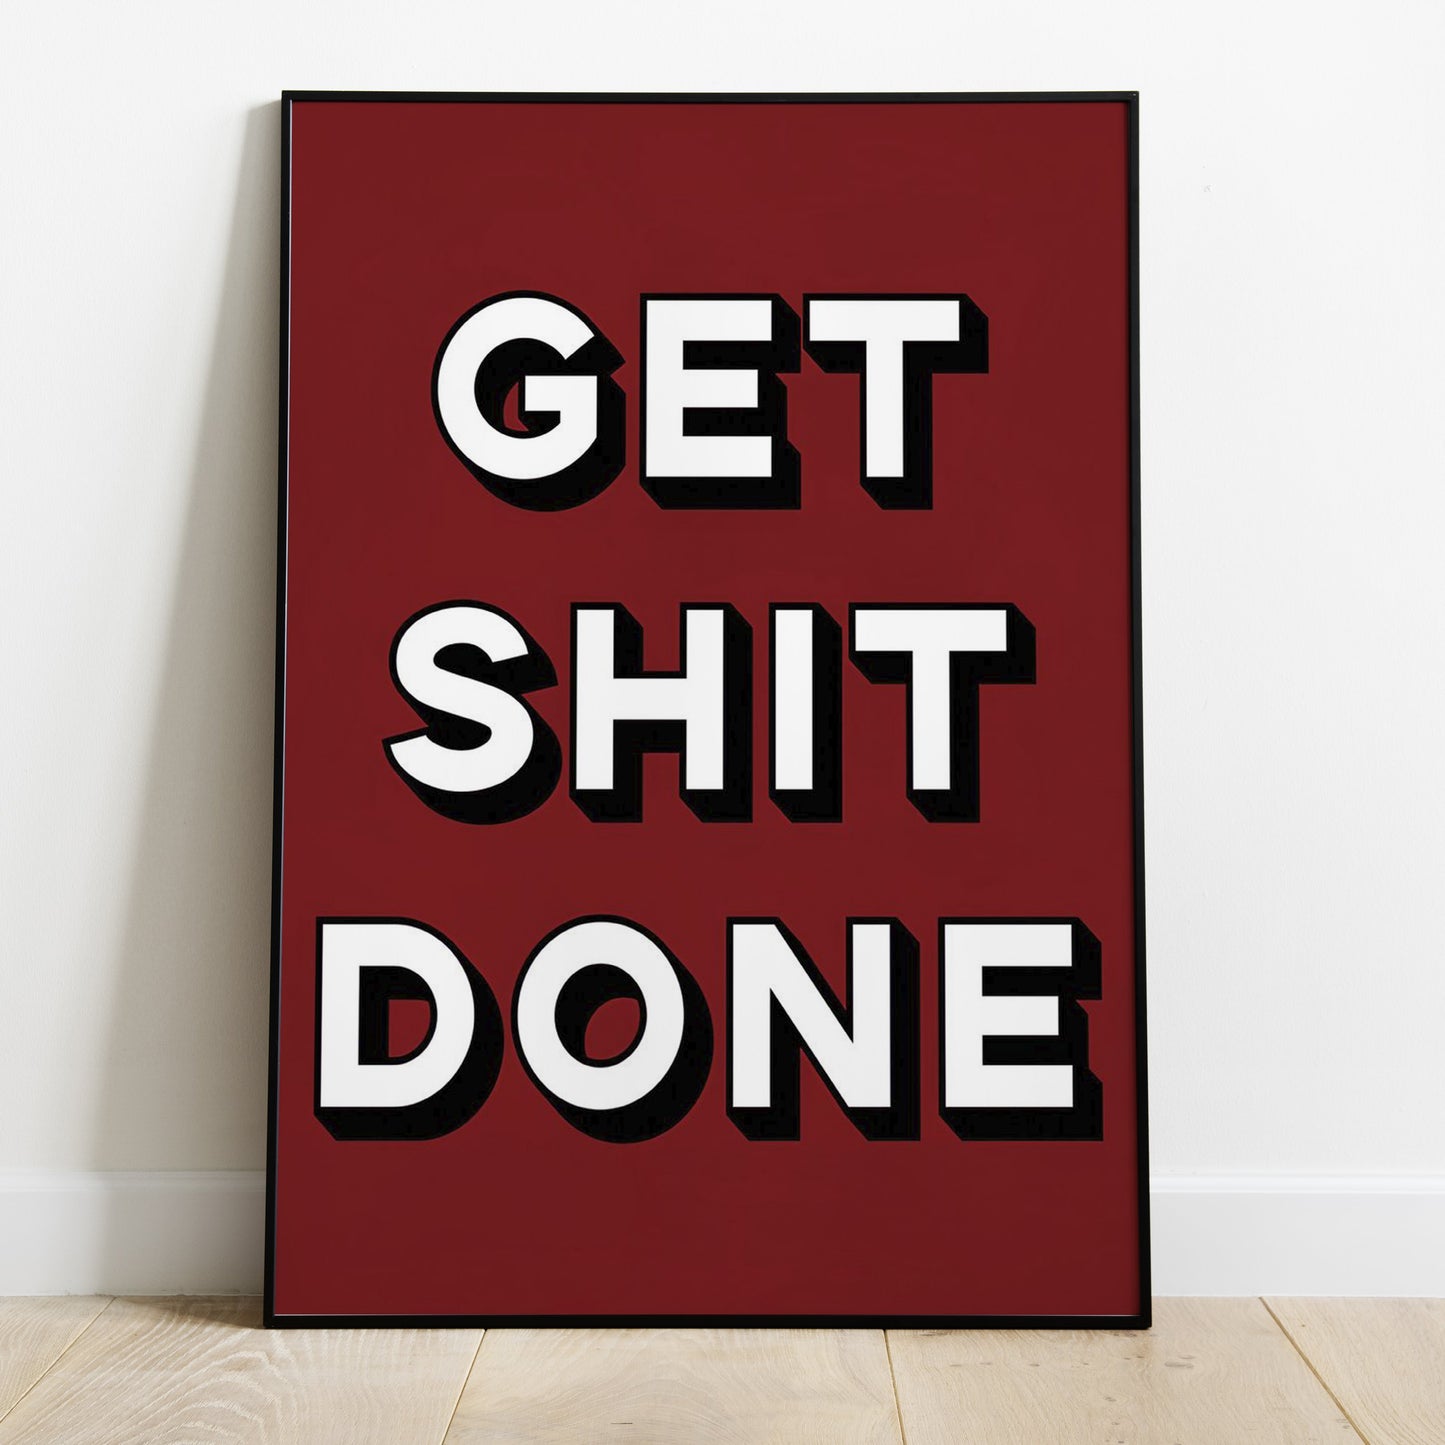 GET SHIT DONE Wall Art for Home Office